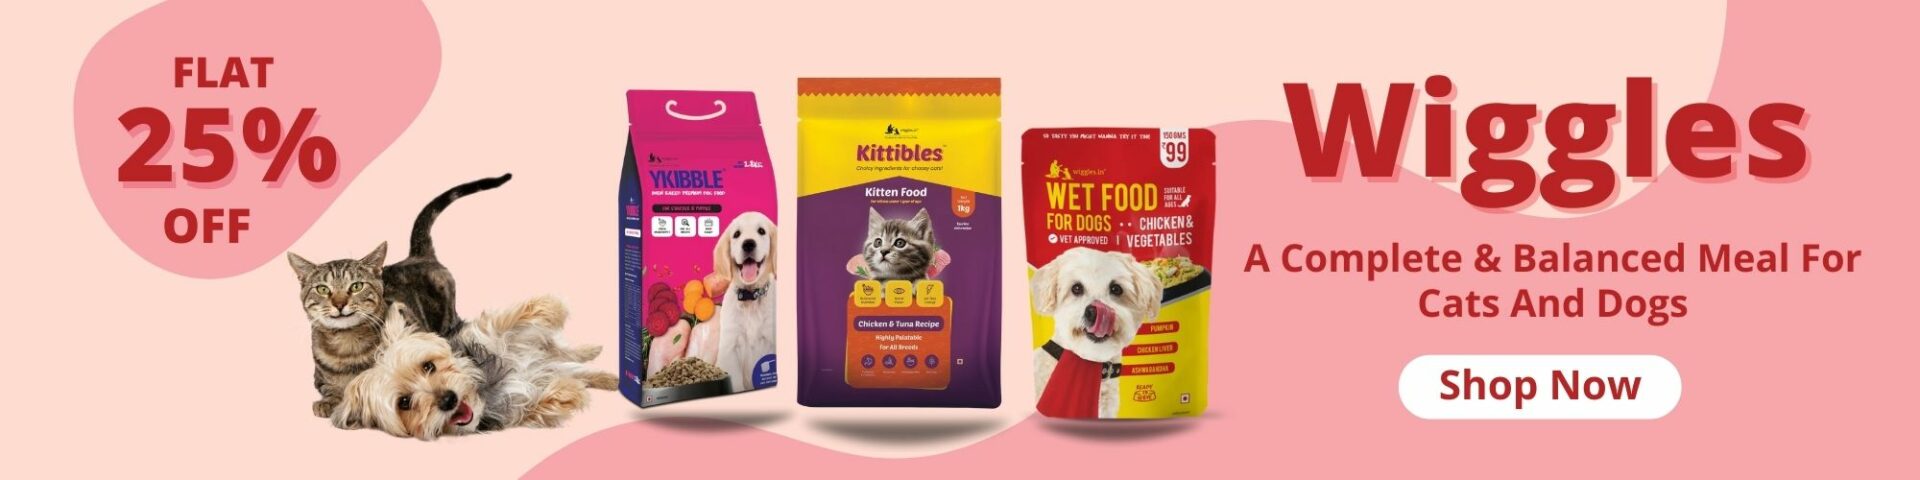 Wiggles - Pet Food for Cat and Dogs - Flat 25% Off